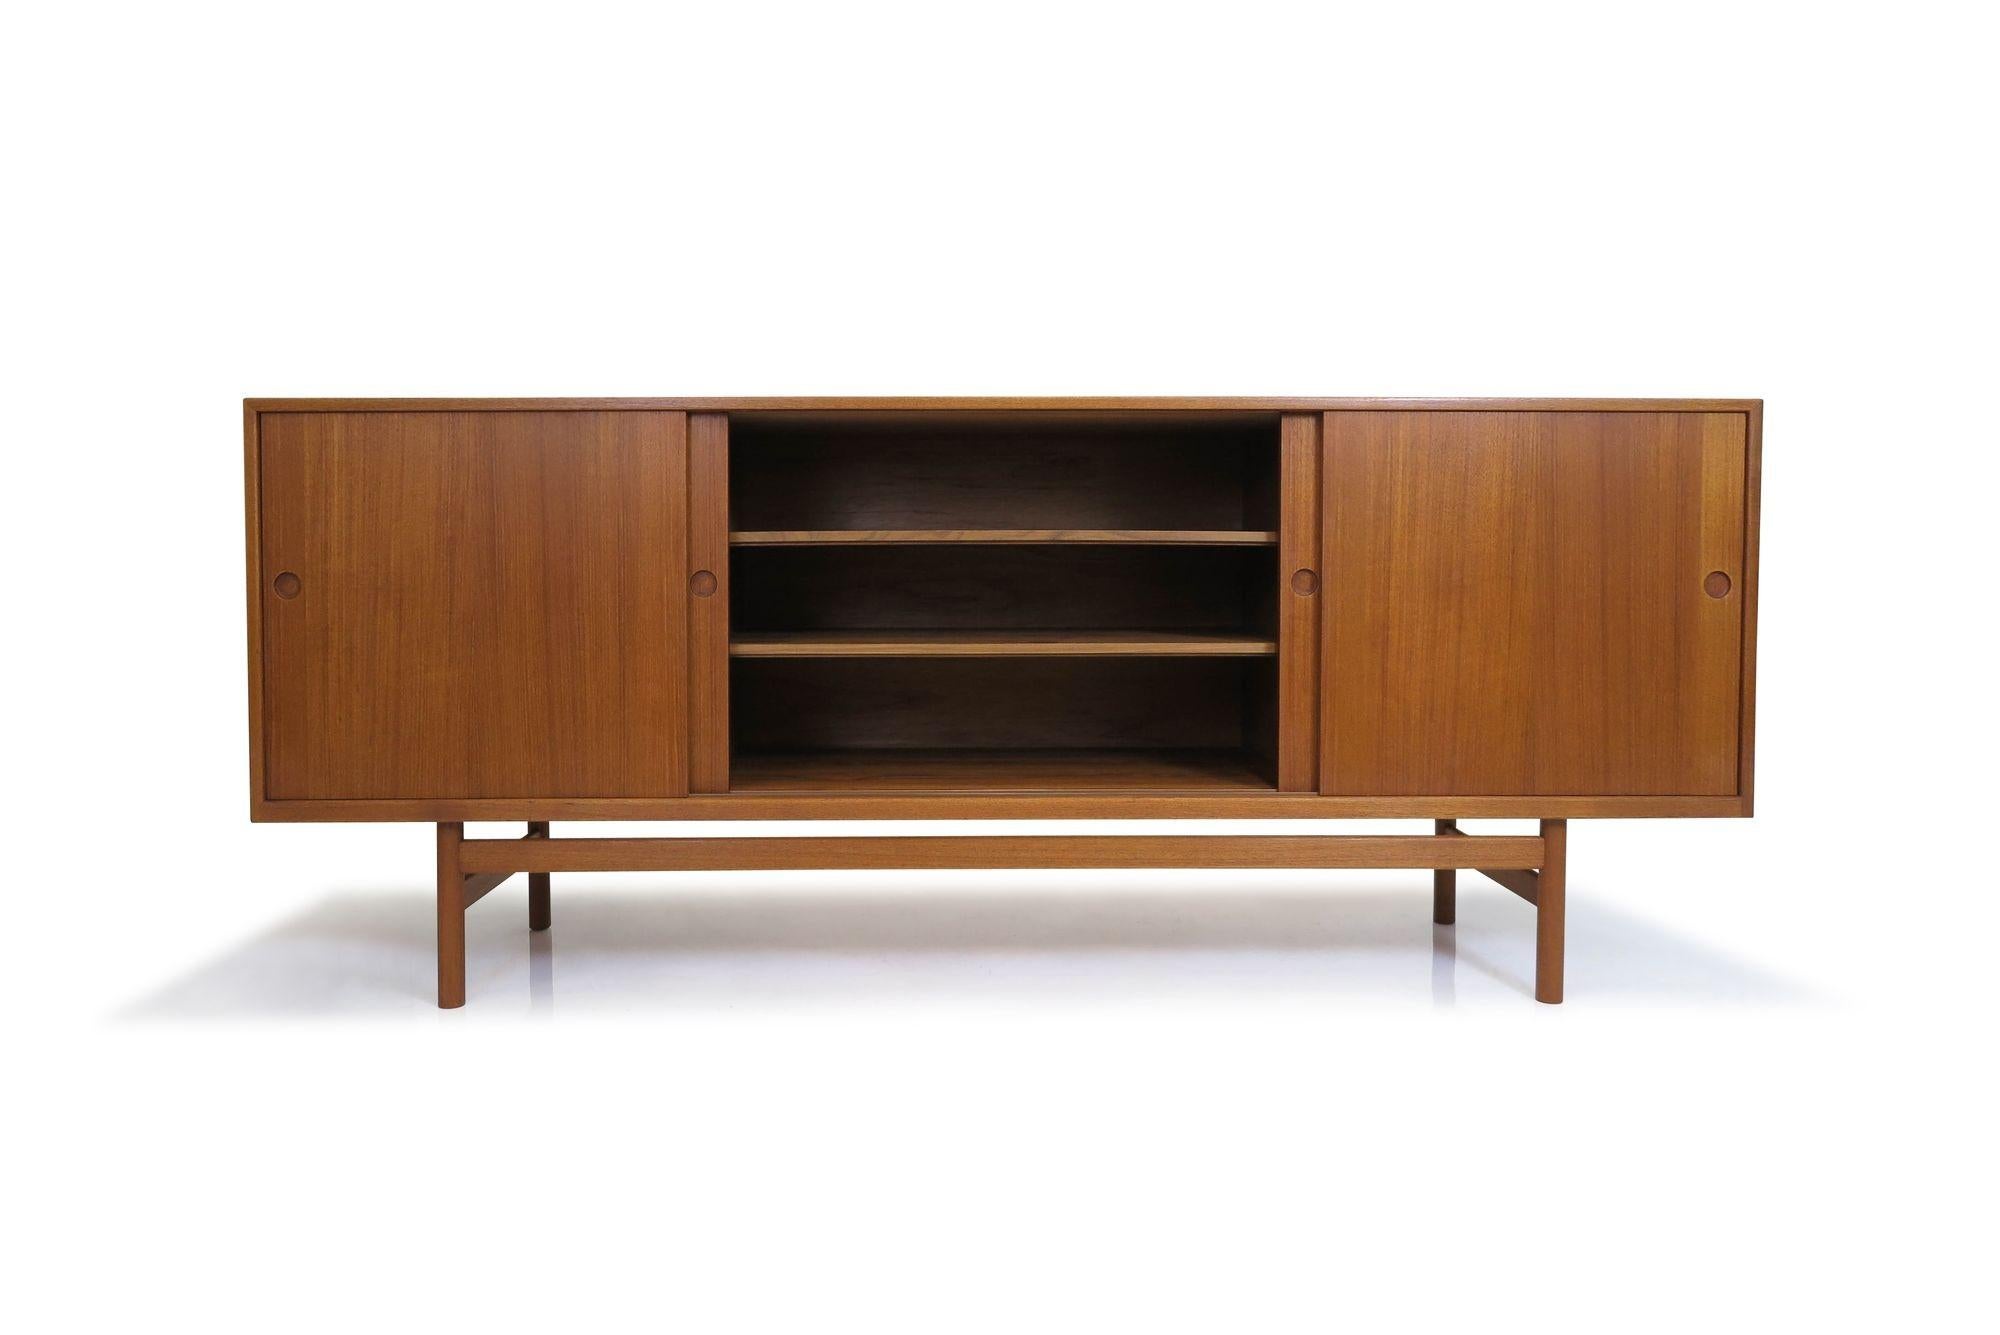 Mid-century teak credenza attributed to Hans J. Wegner, Denmark, 1955. The sideboard is handcrafted from old-growth teak with mitered corners and features four sliding cabinet doors with recessed round pulls. The doors open to reveal a teak interior